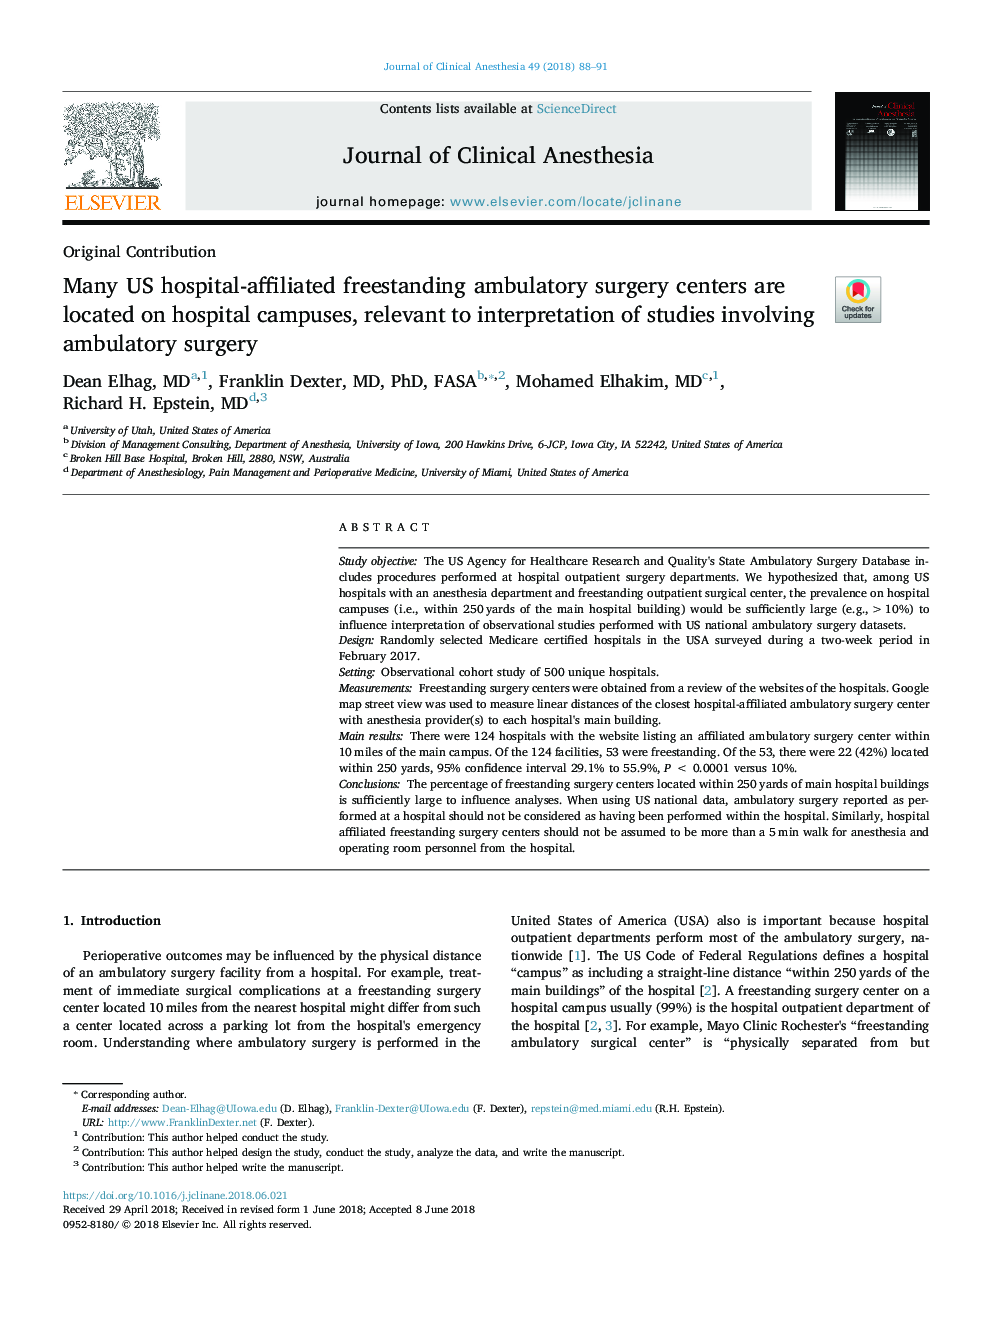 Many US hospital-affiliated freestanding ambulatory surgery centers are located on hospital campuses, relevant to interpretation of studies involving ambulatory surgery